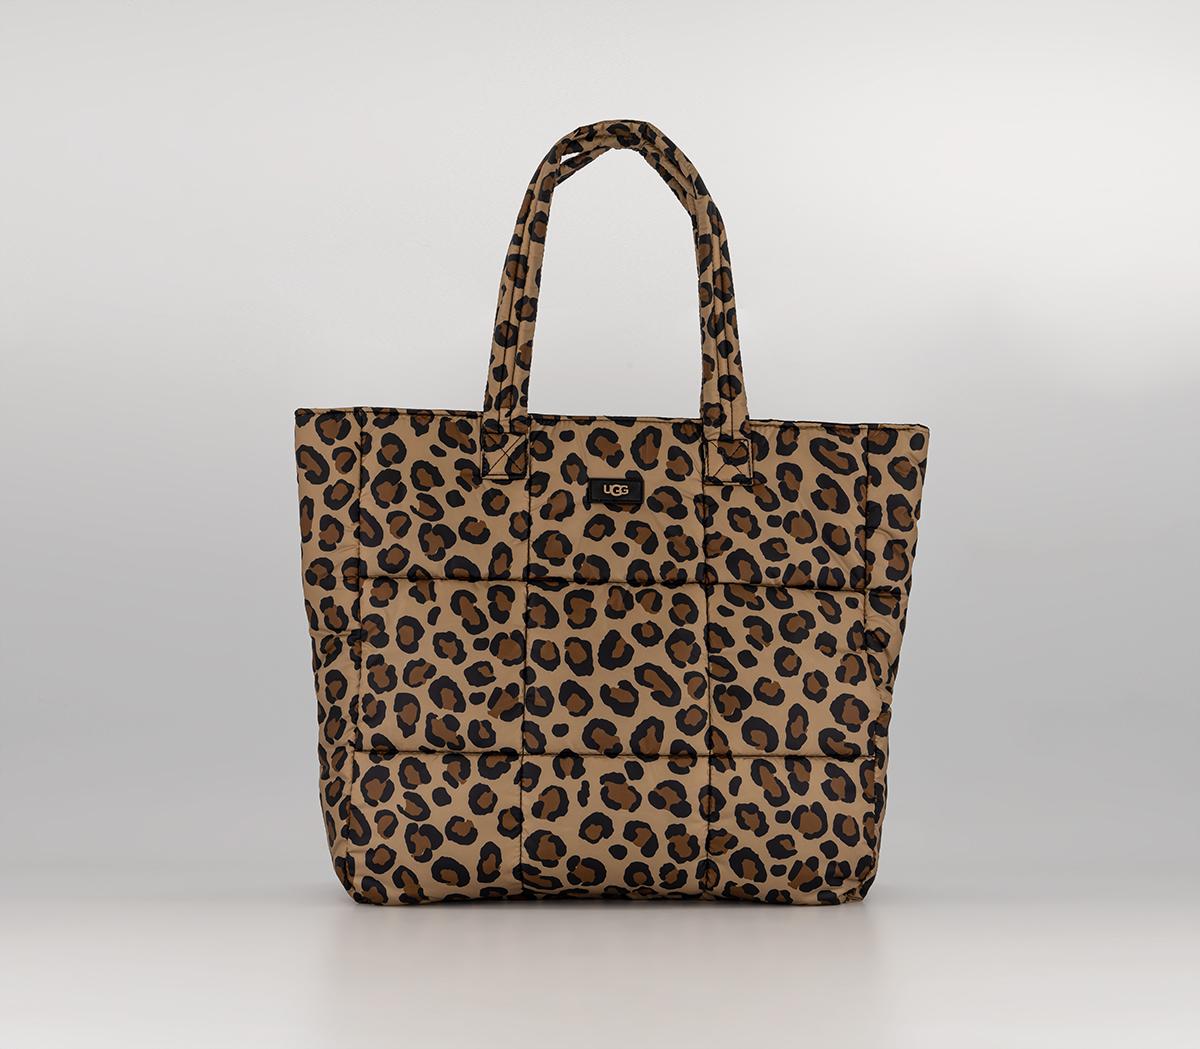 UGGEllory Puff Tote BagNatural Spotty